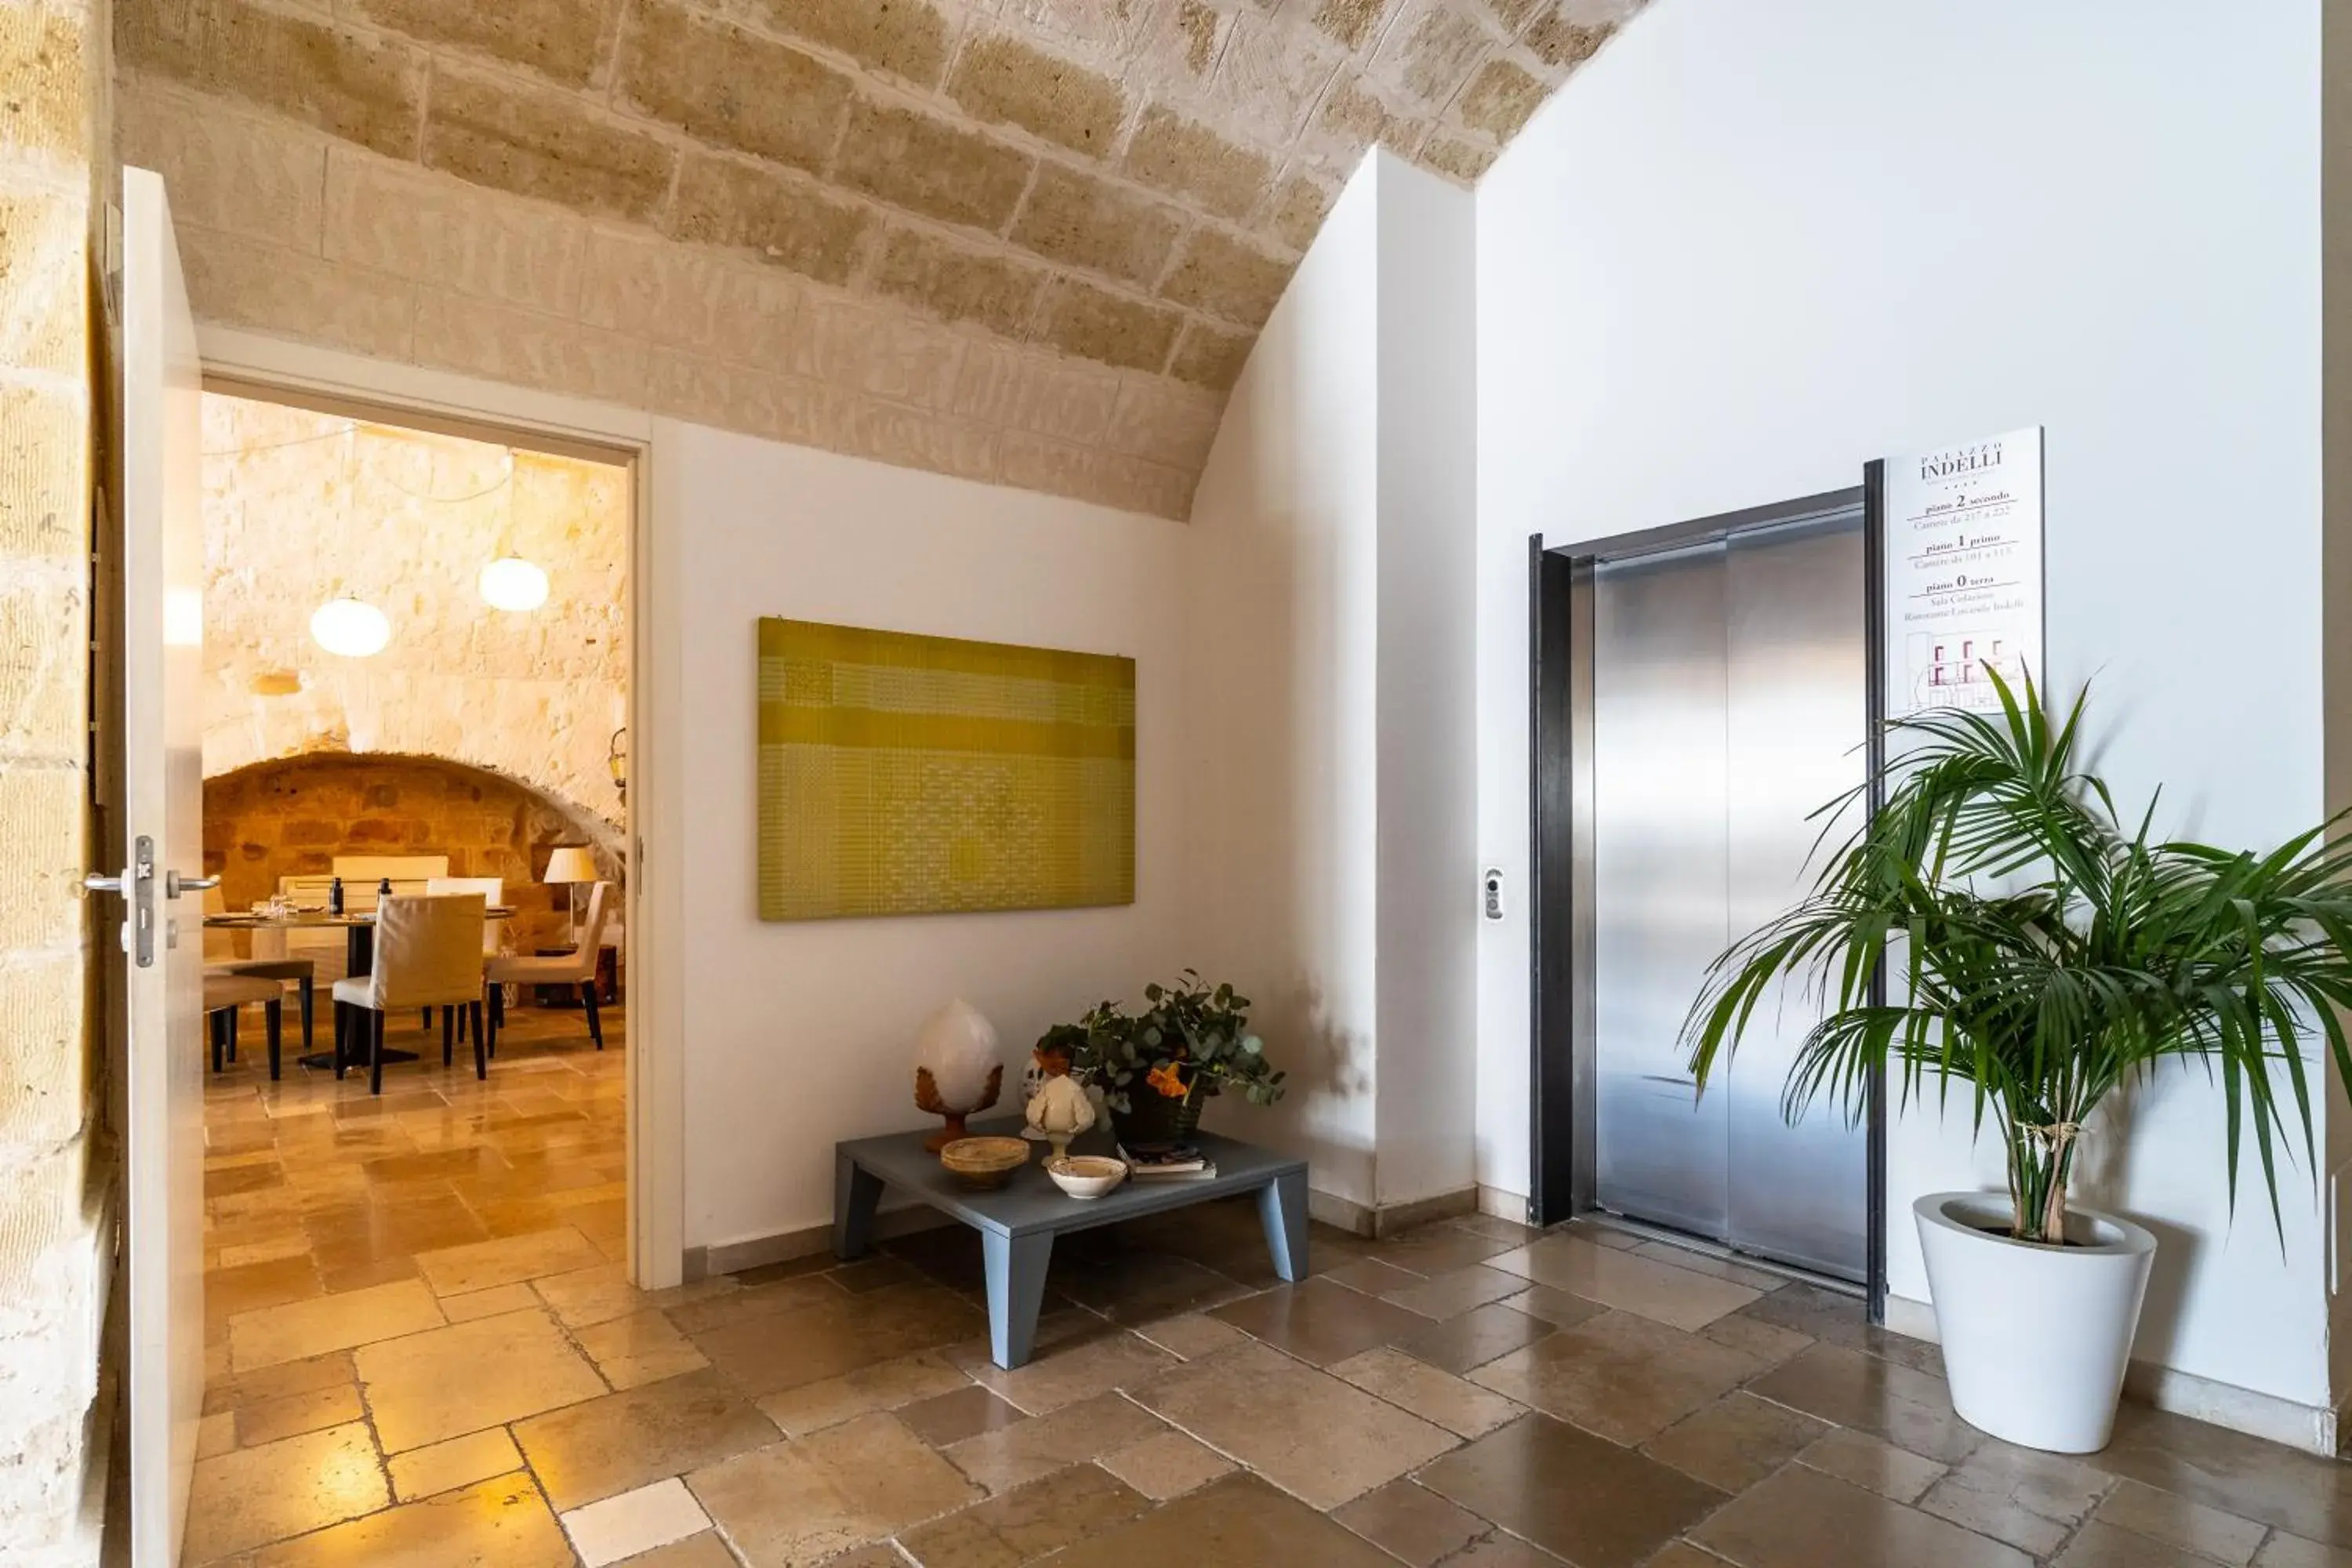 Lobby or reception in Palazzo Indelli